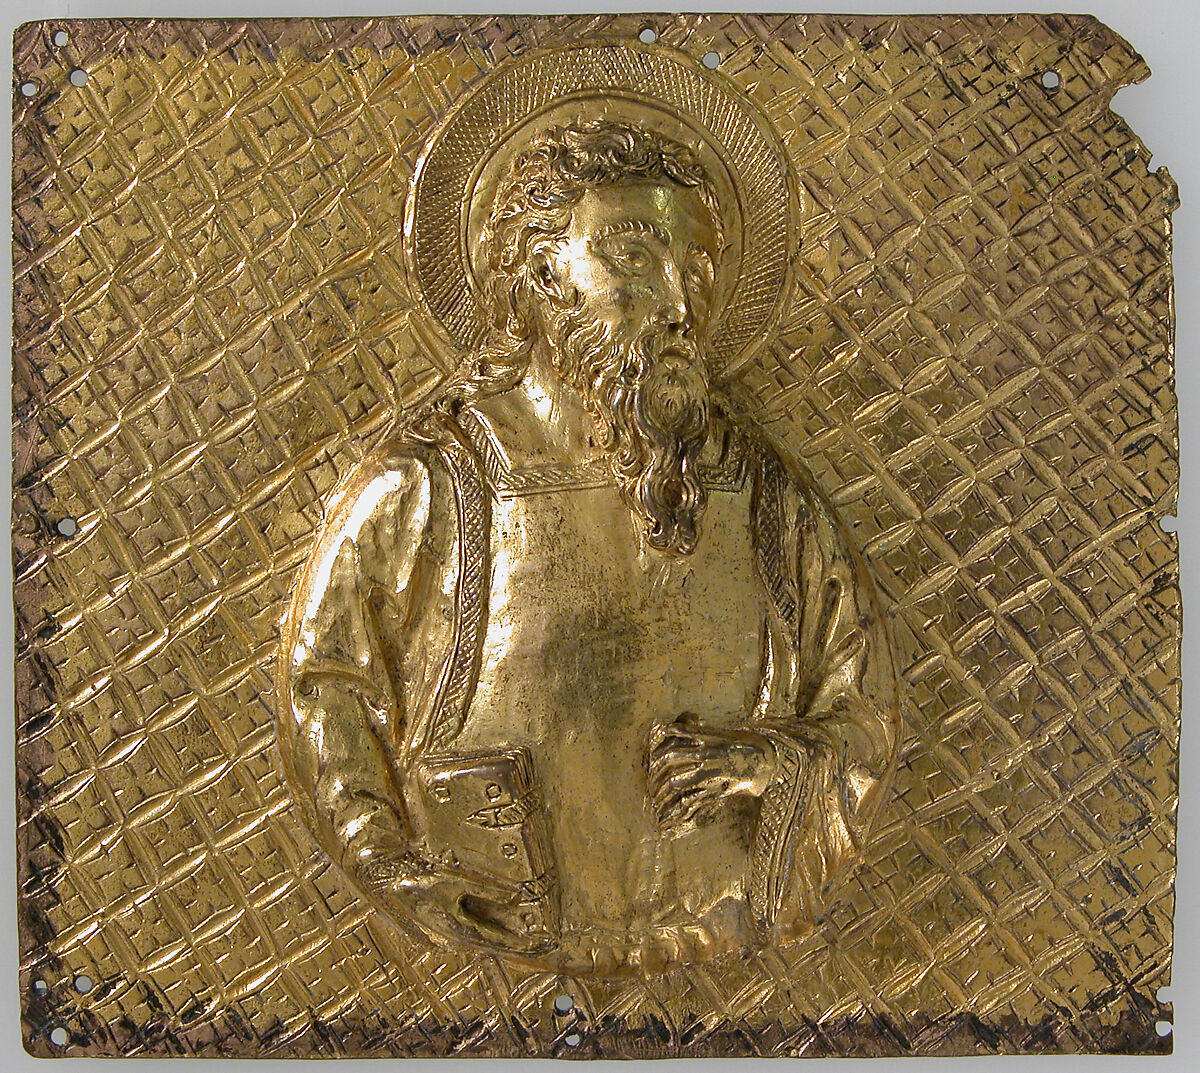 Bust of an Apostle, Gilt copper alloy, North Italian 